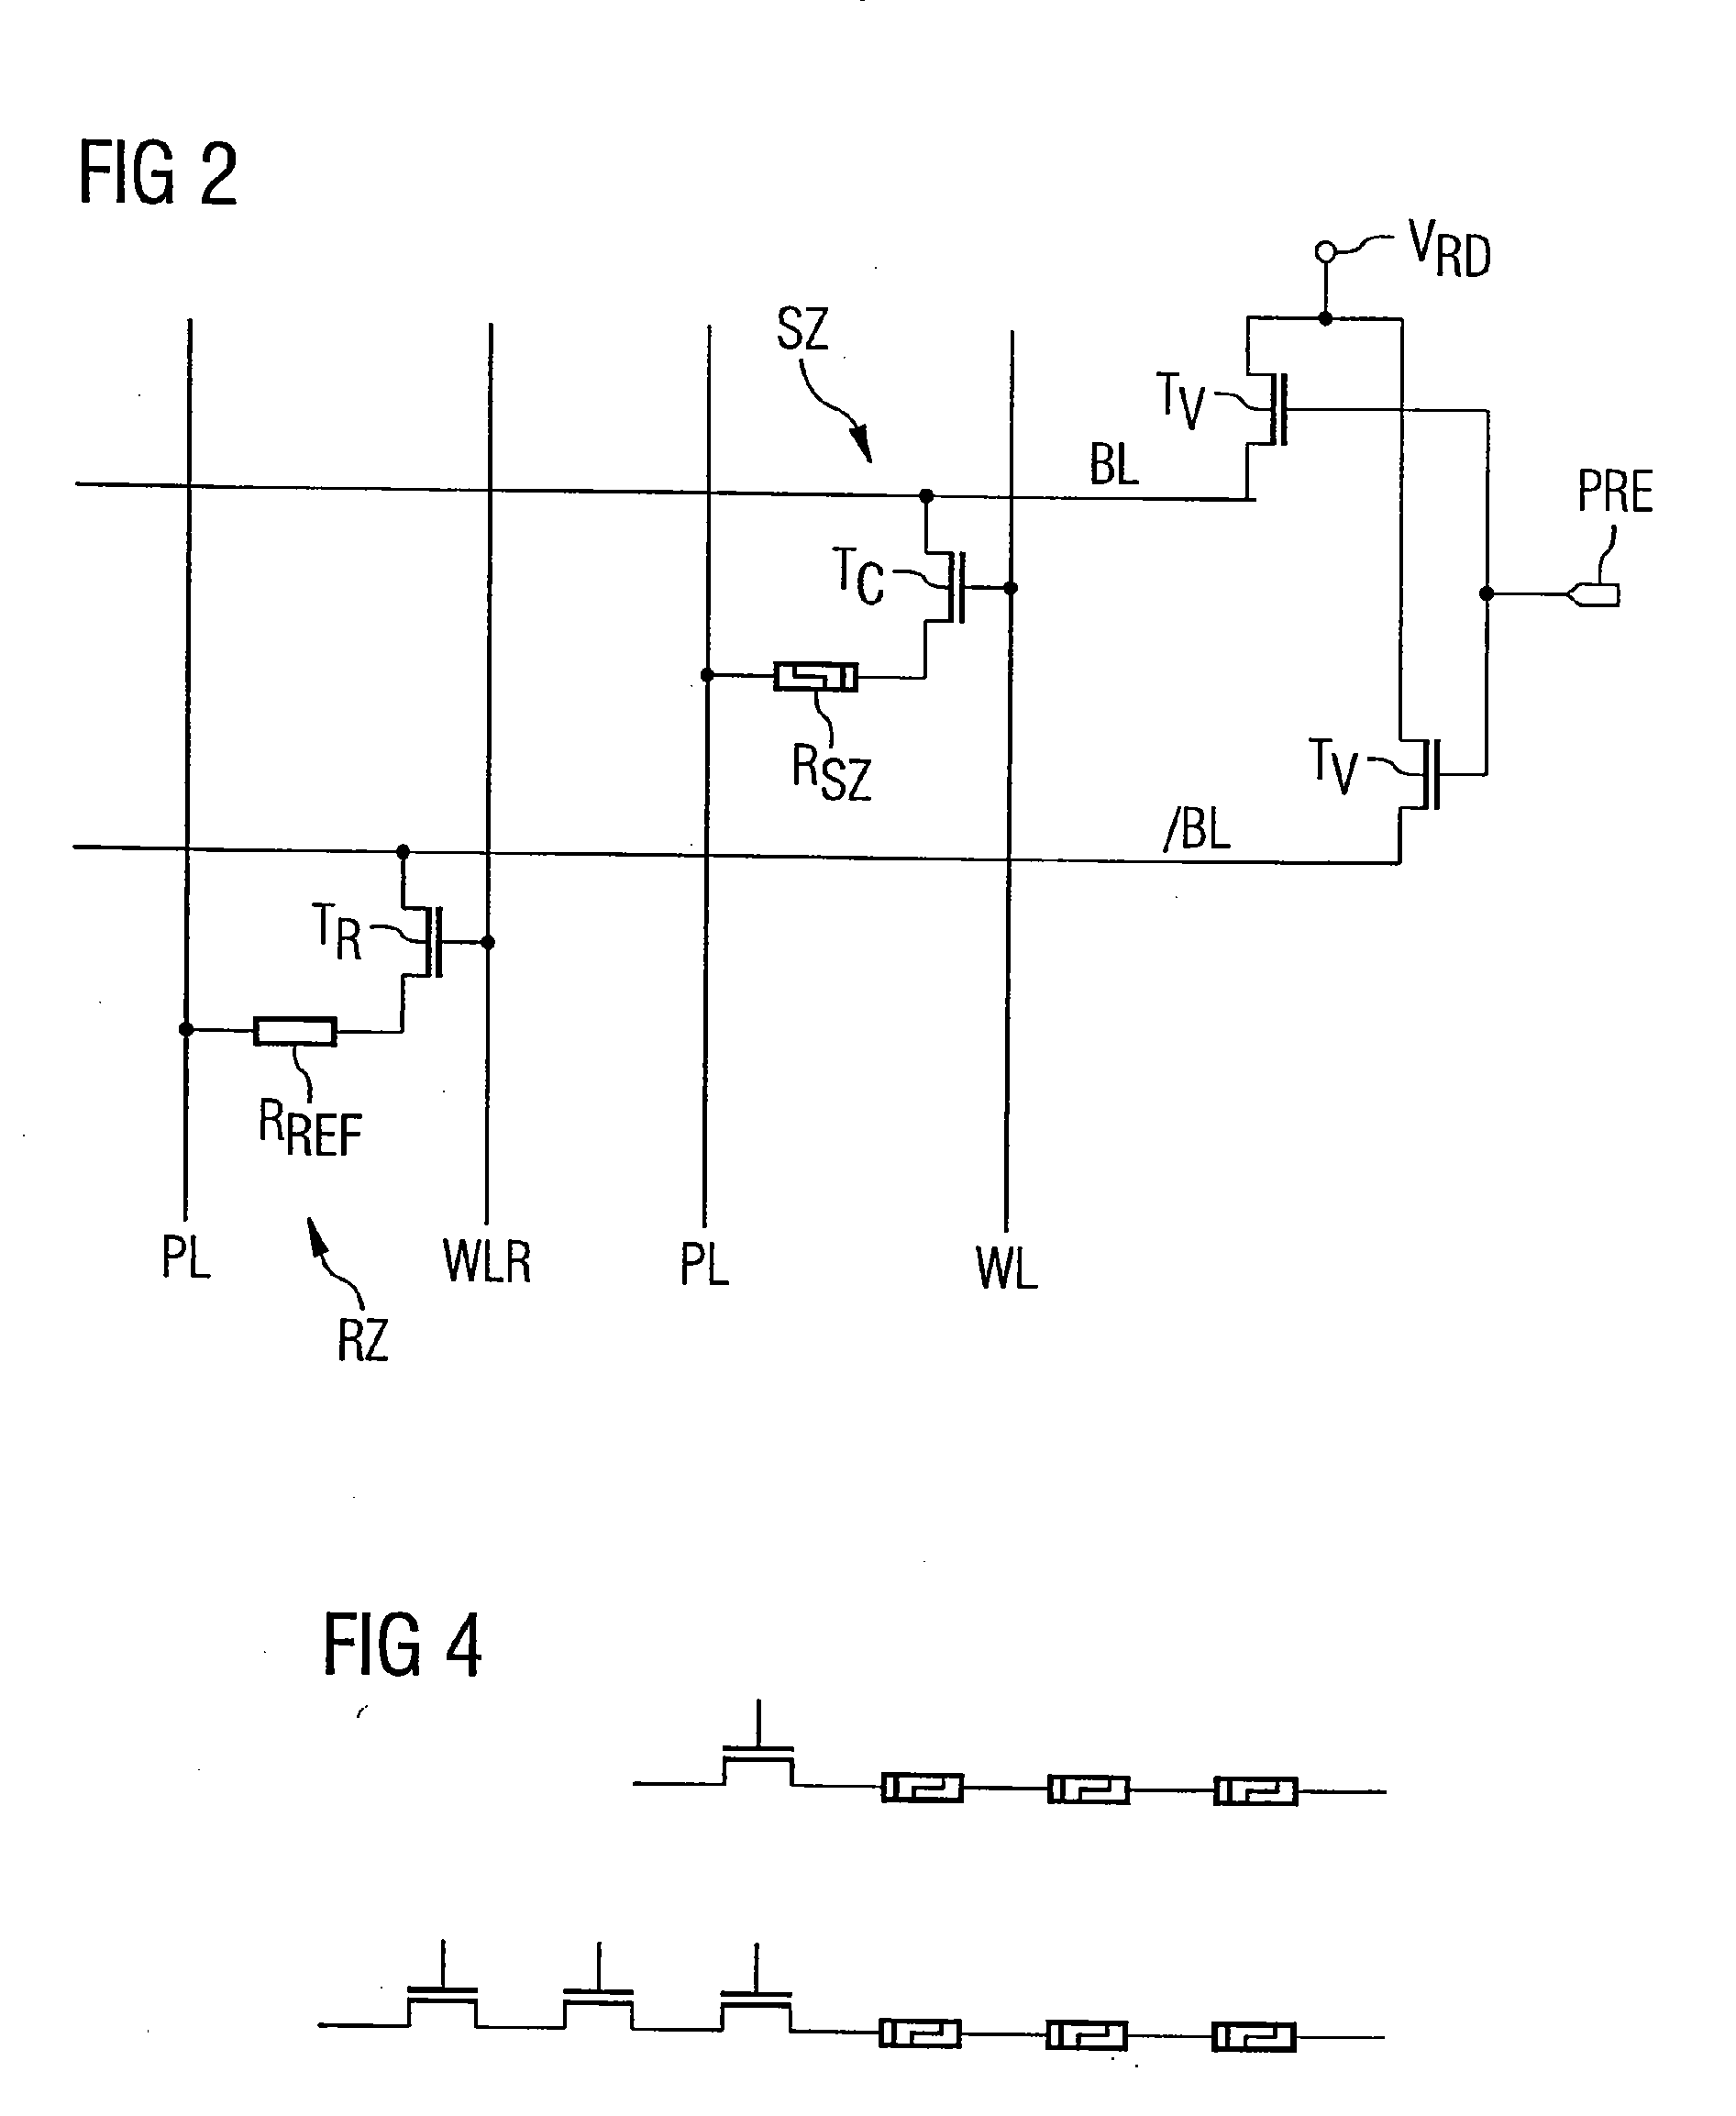 Memory with resistance memory cell and evaluation circuit